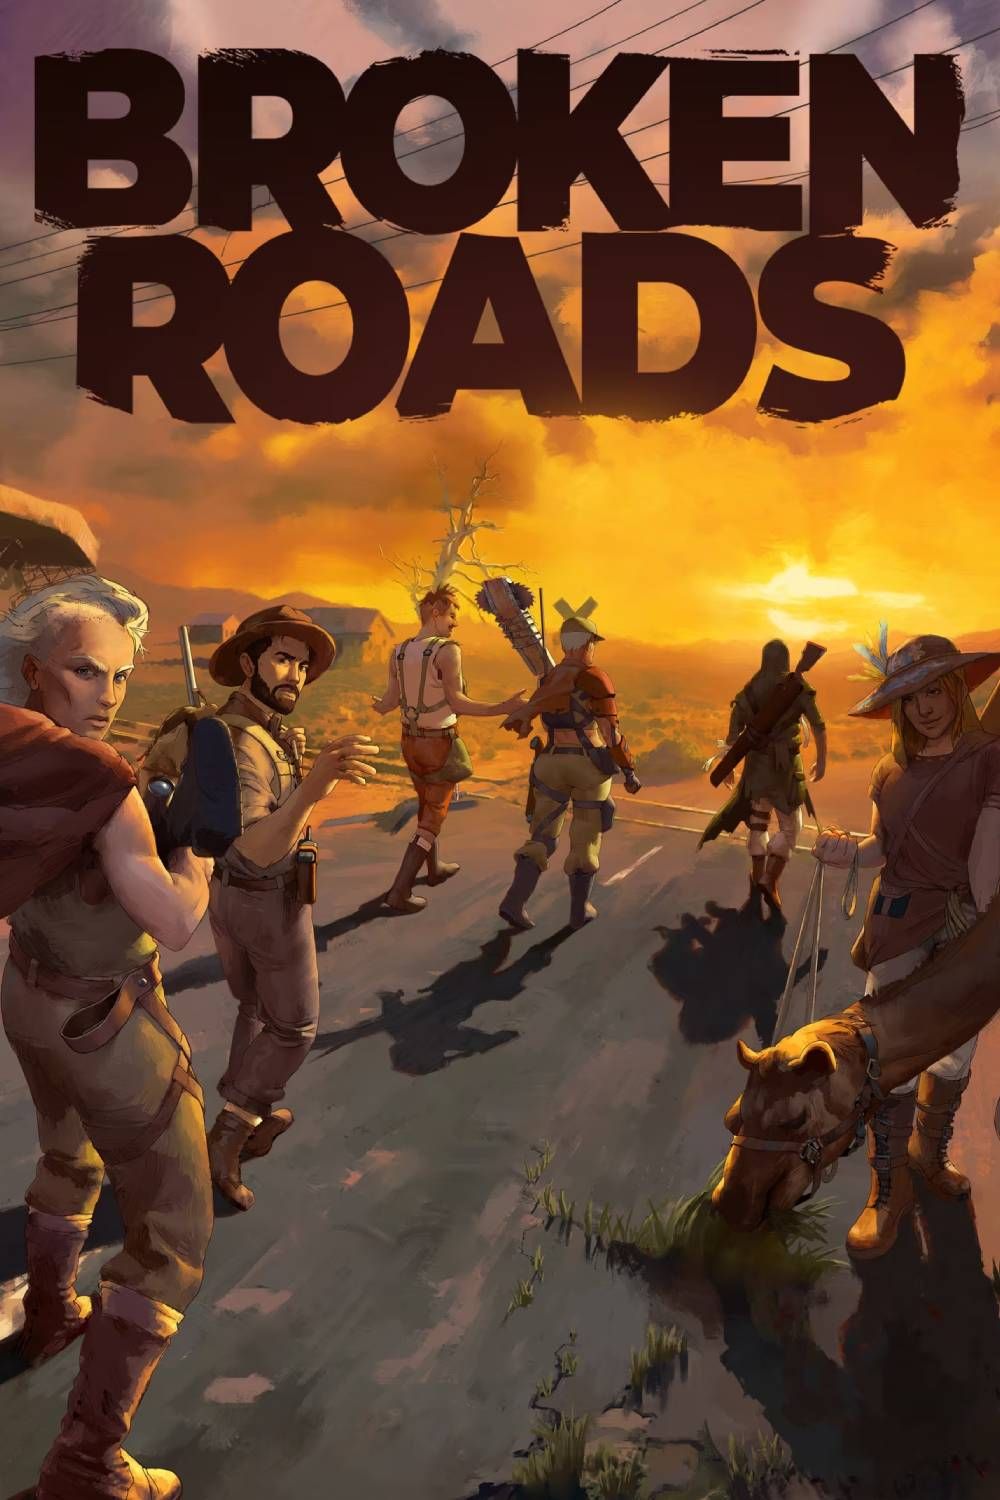 Broken Roads Cover Art featuring main cast on a road leading to a sunset